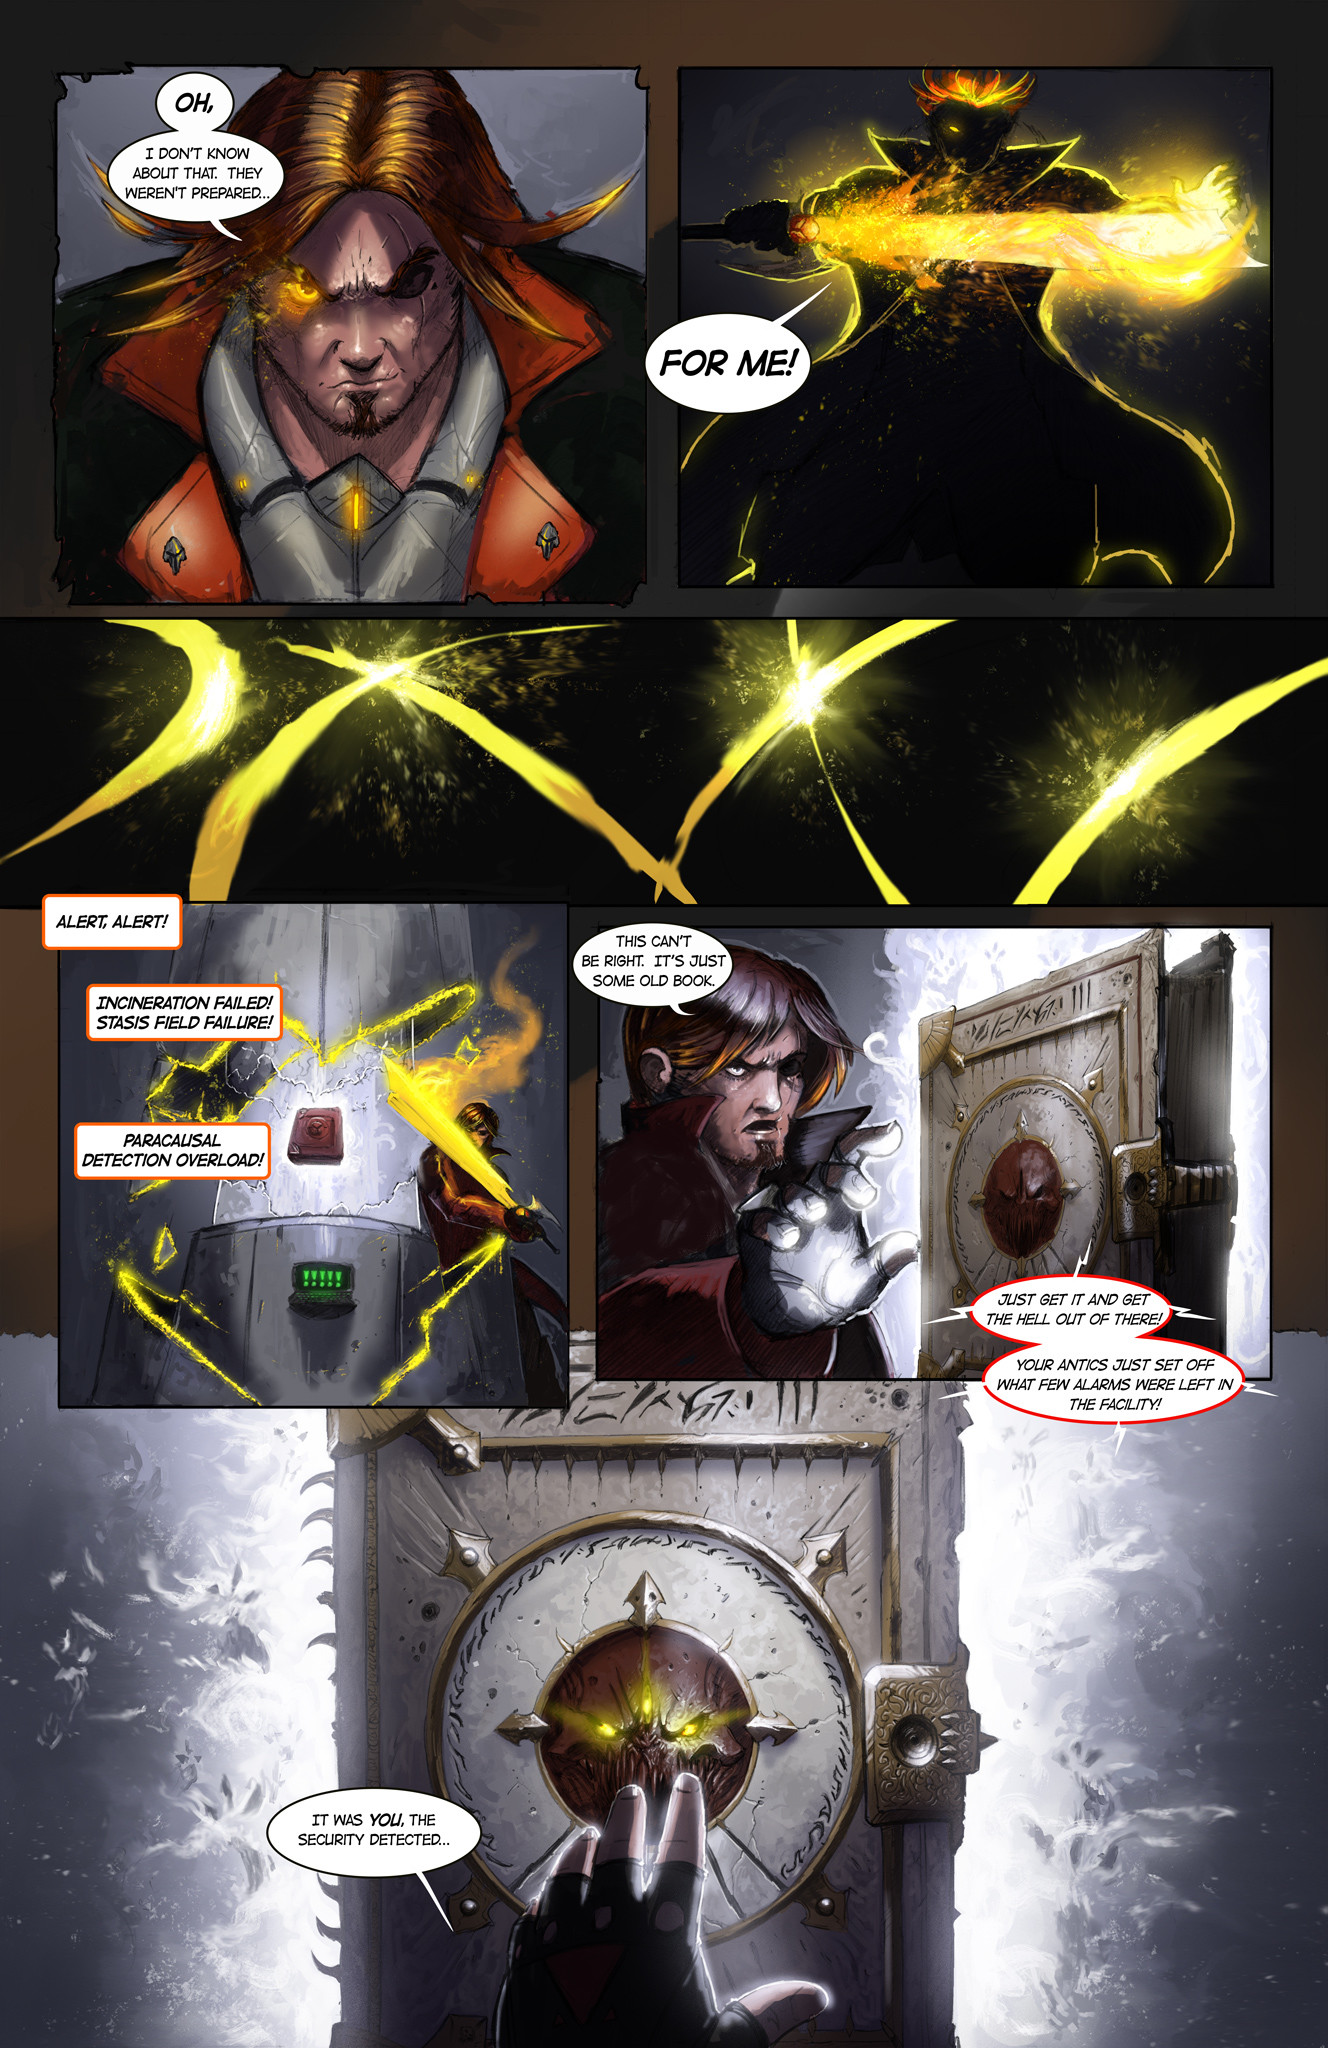 michael-rookard-chapter1-page3.jpg